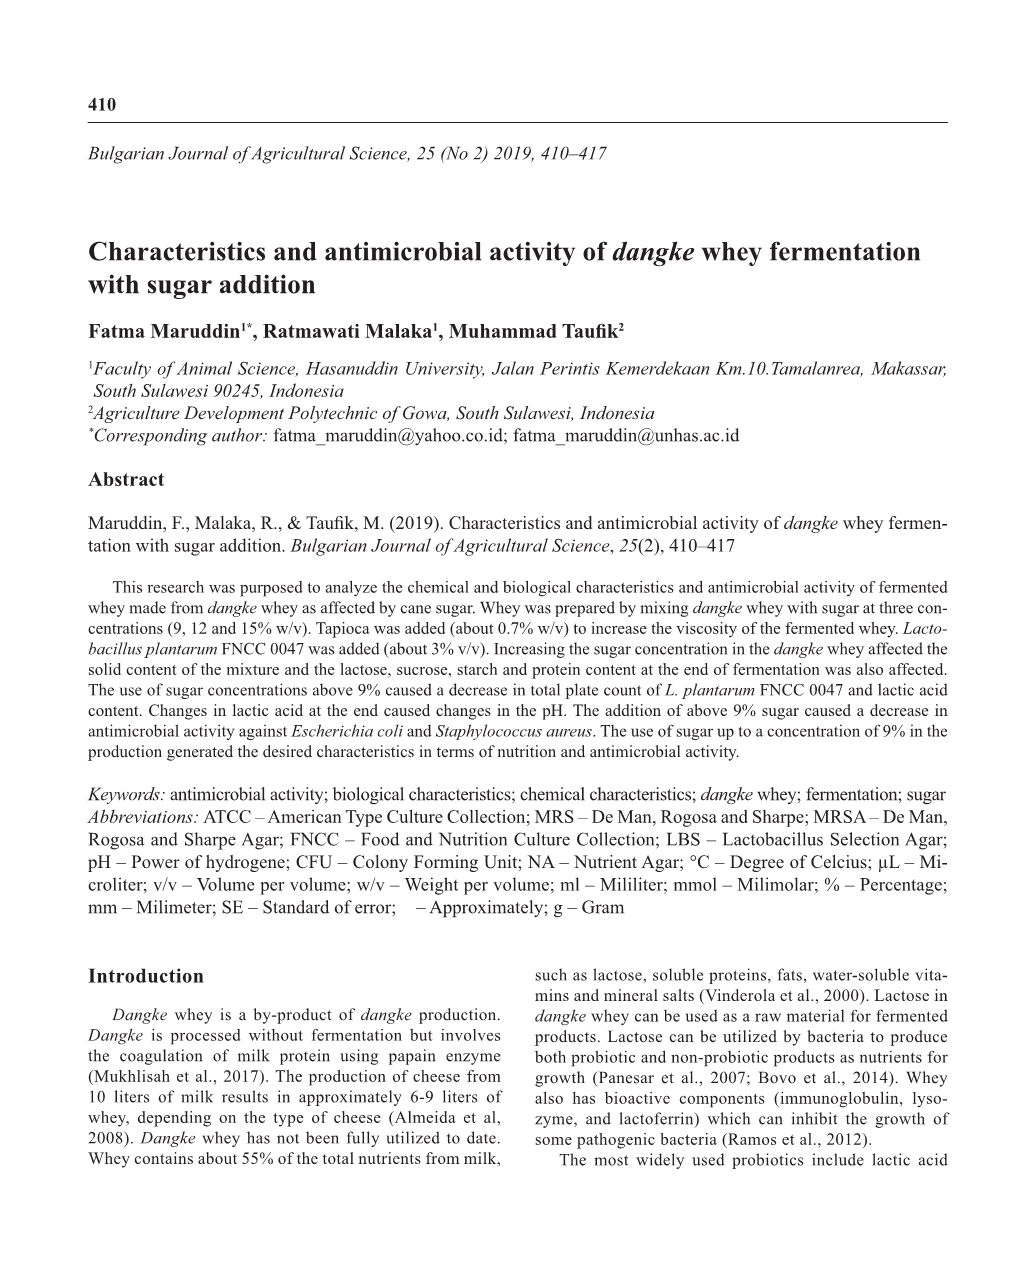 Characteristics and Antimicrobial Activity of Dangke Whey Fermentation with Sugar Addition